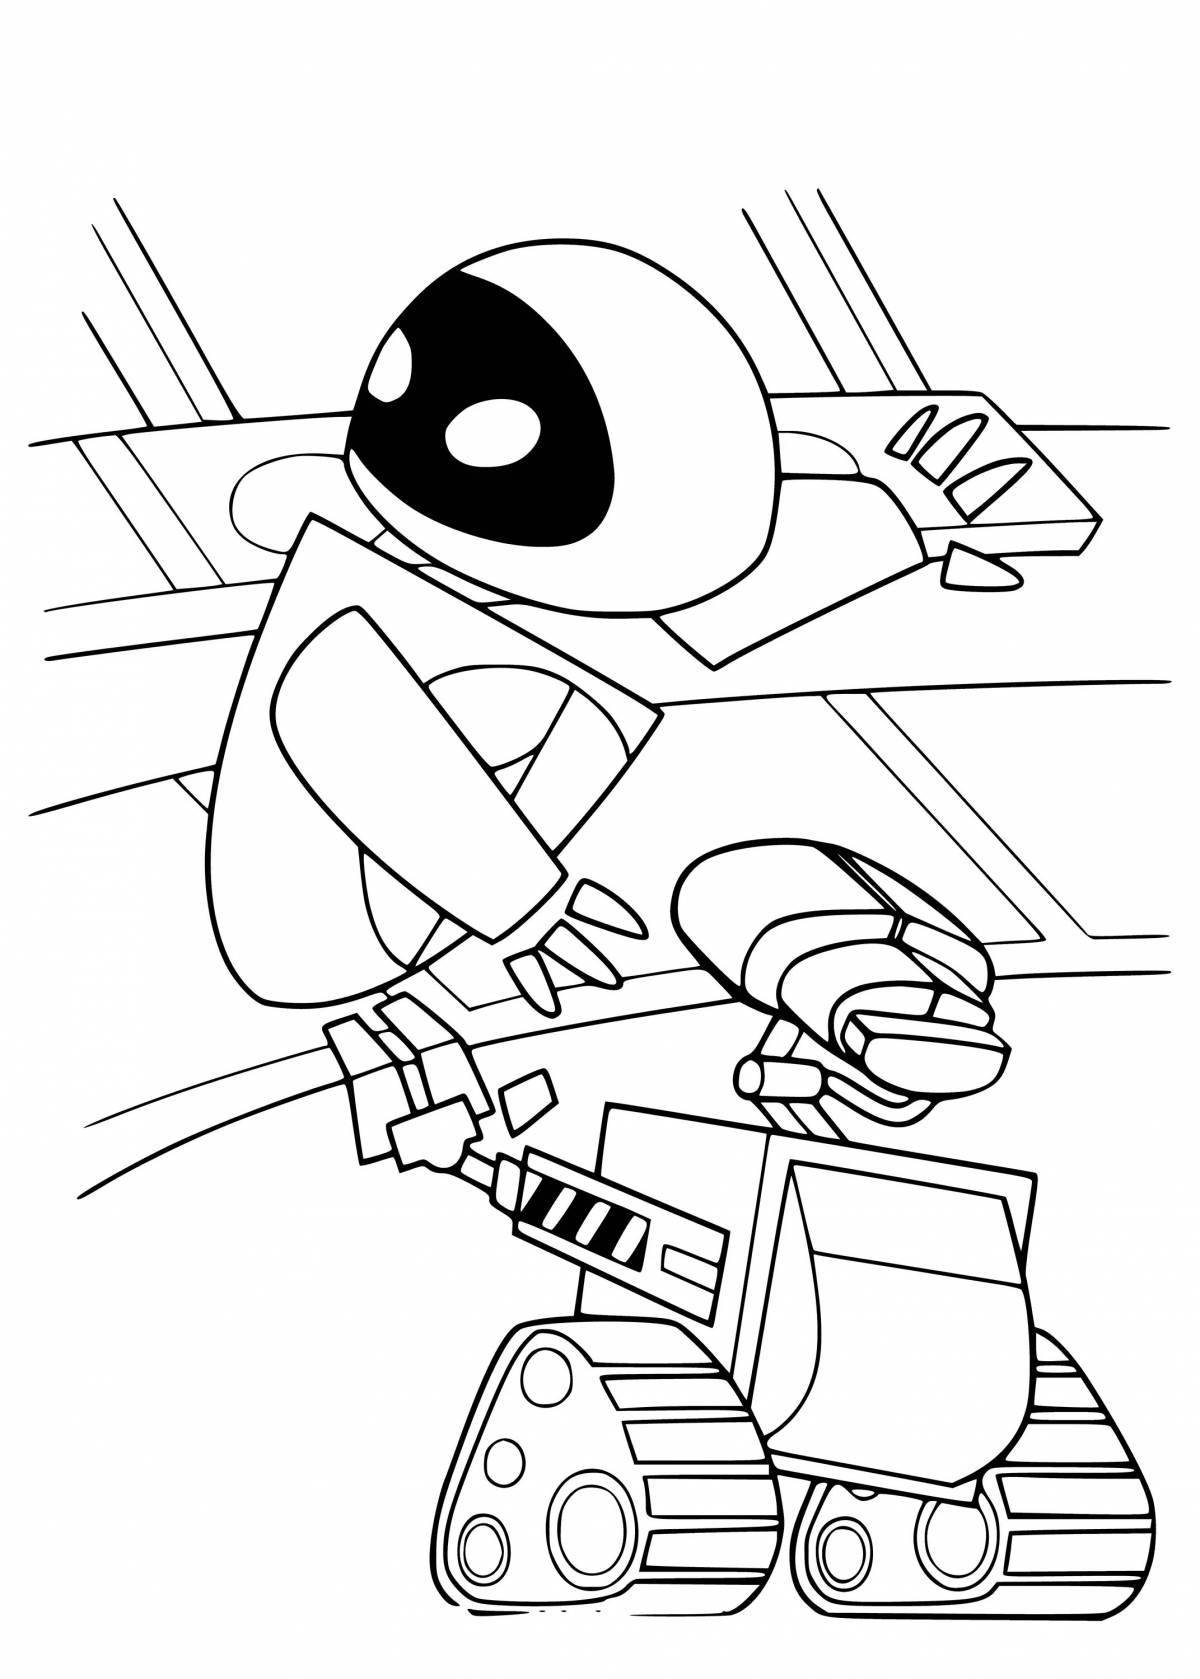 Gorgeous robot valley coloring page